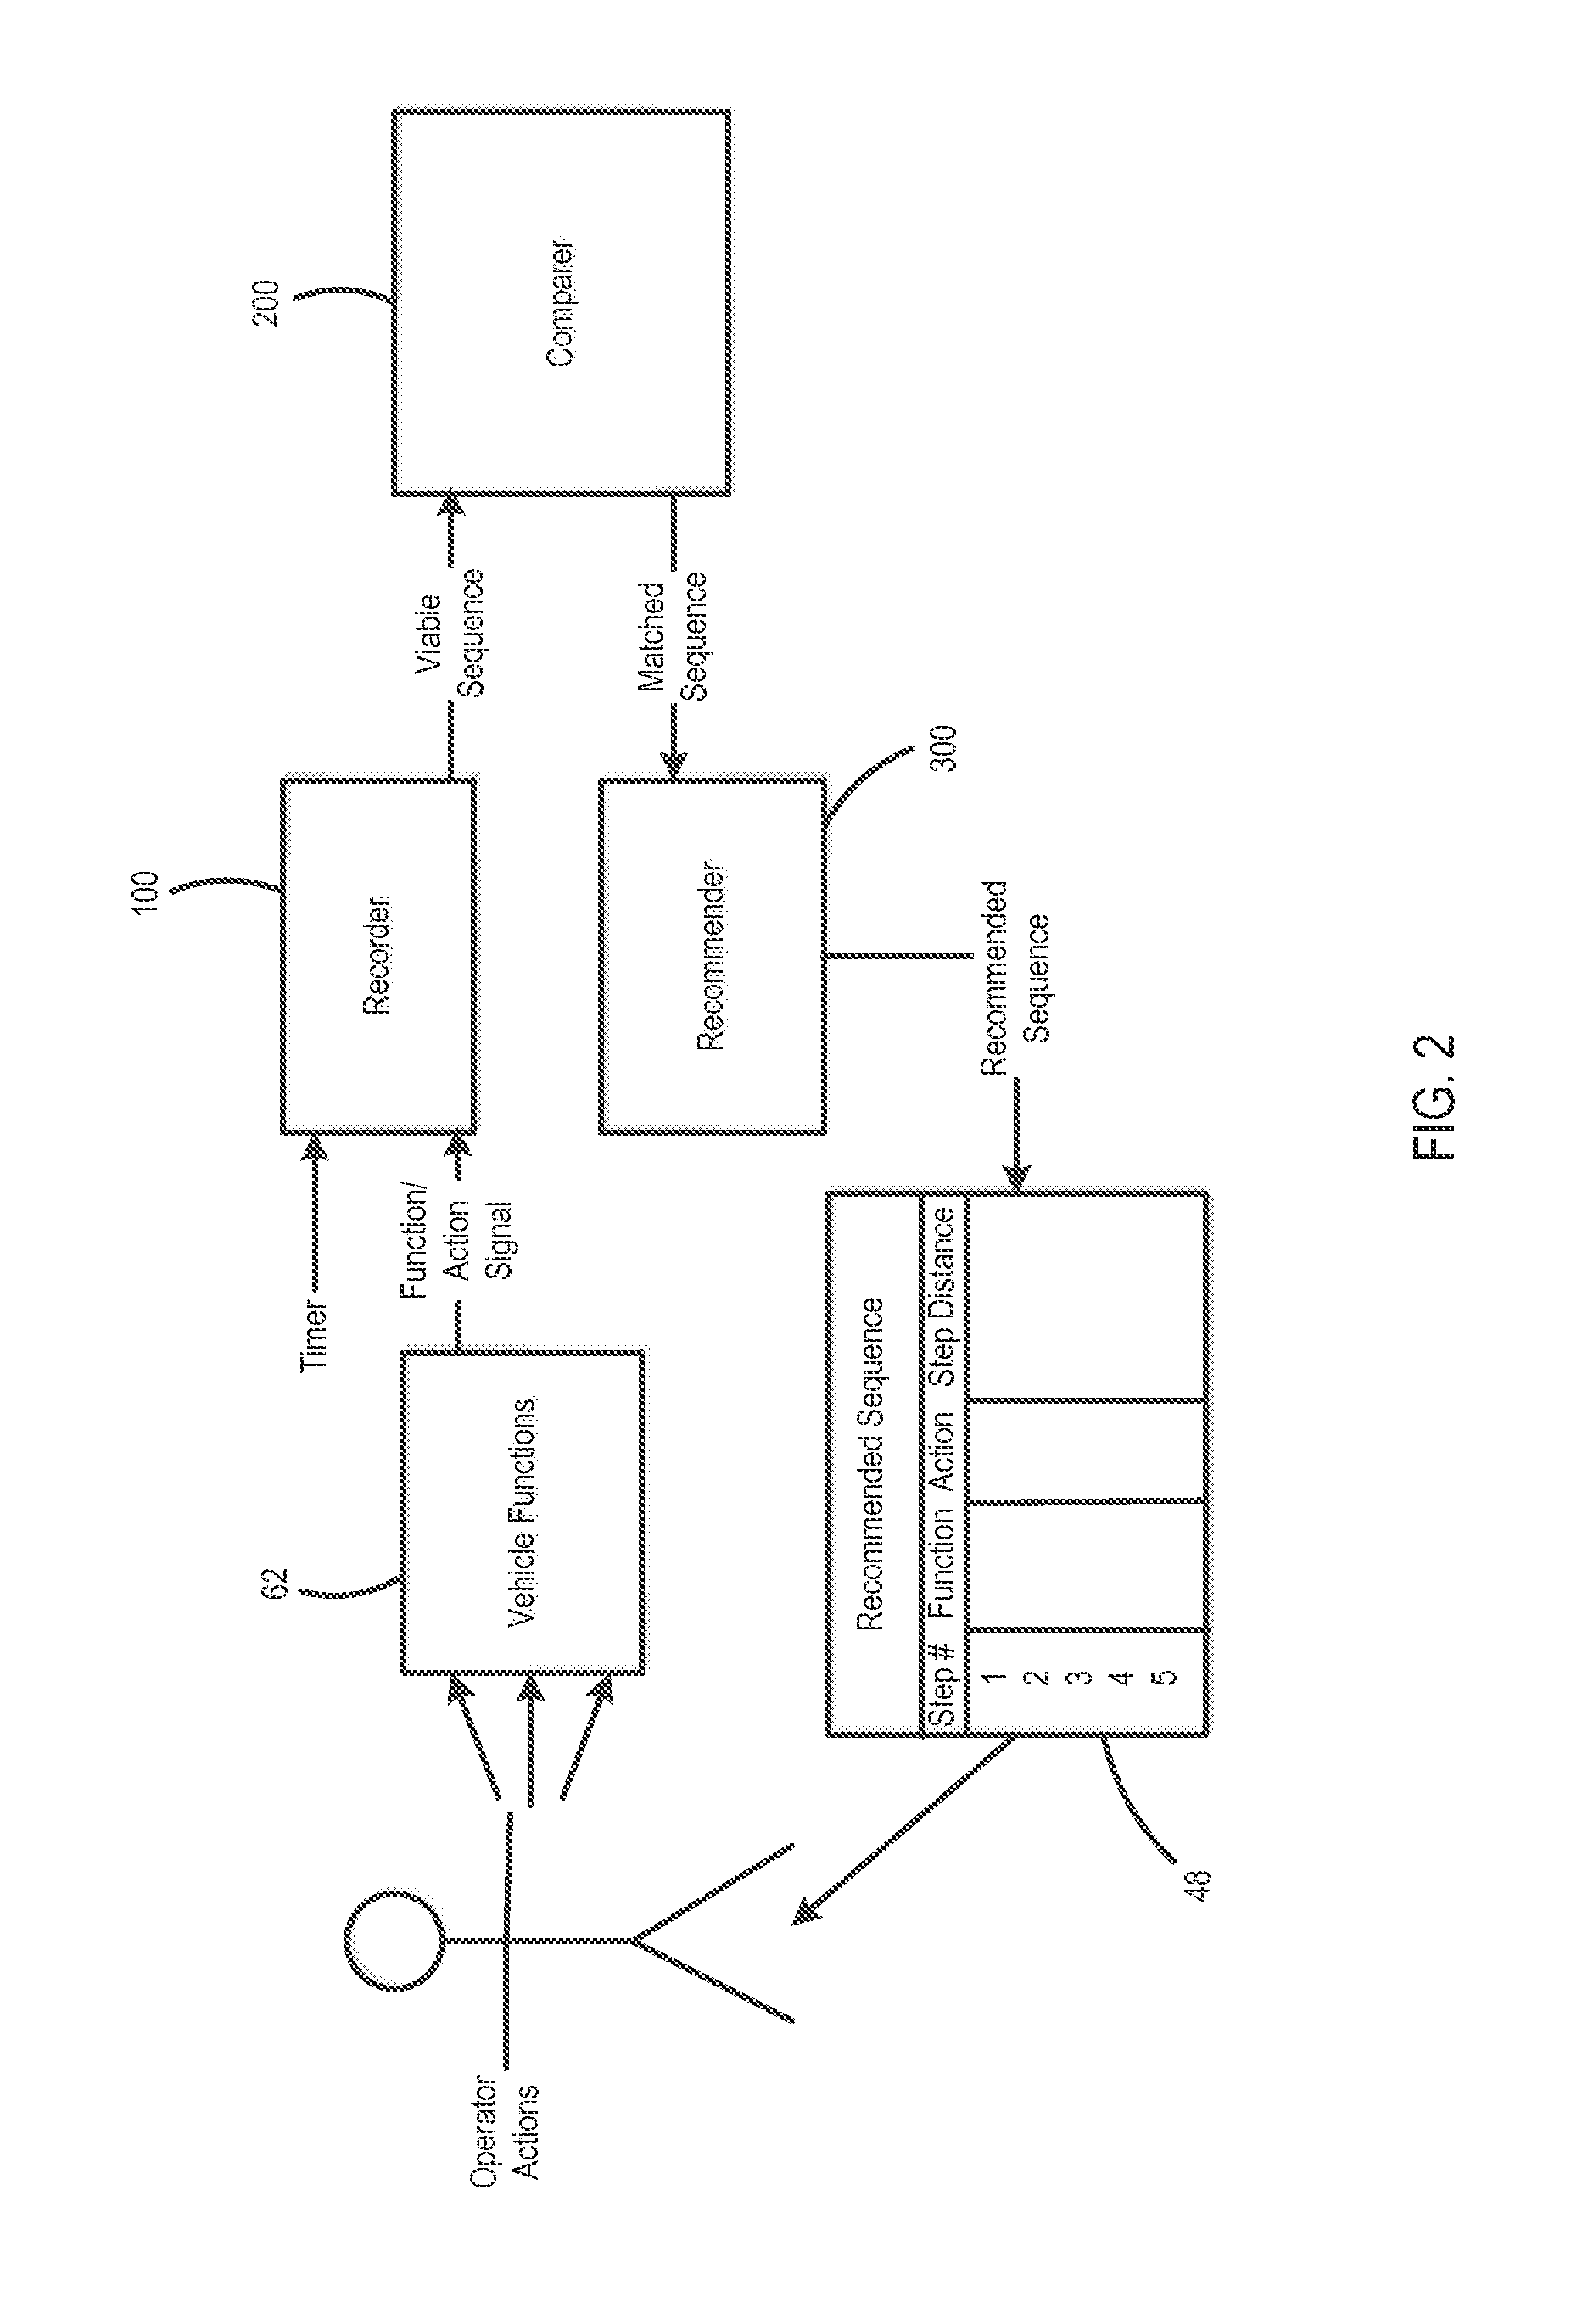 Vehicle operation management system with automatic sequence detection